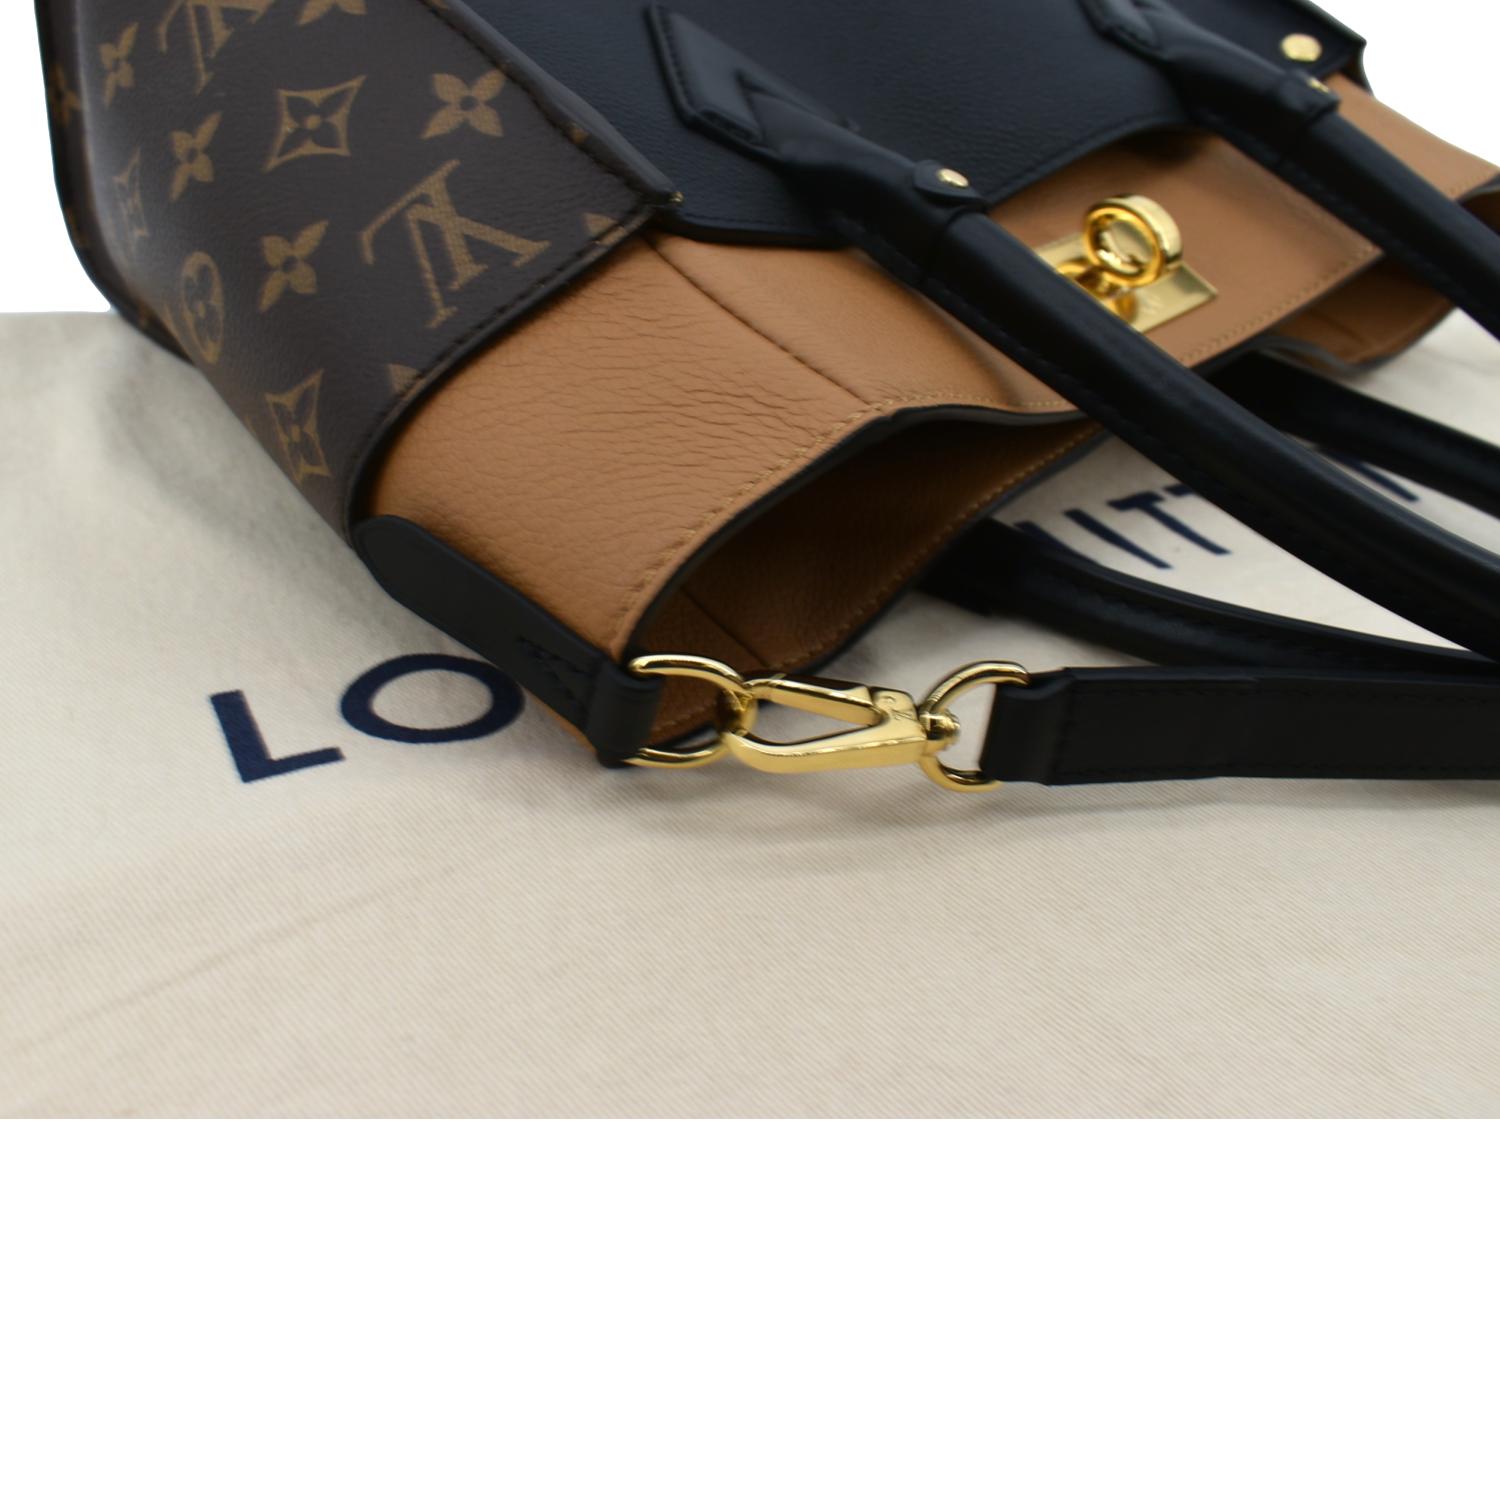 LUXURY* Louis Vuitton On My Side GM Bag 